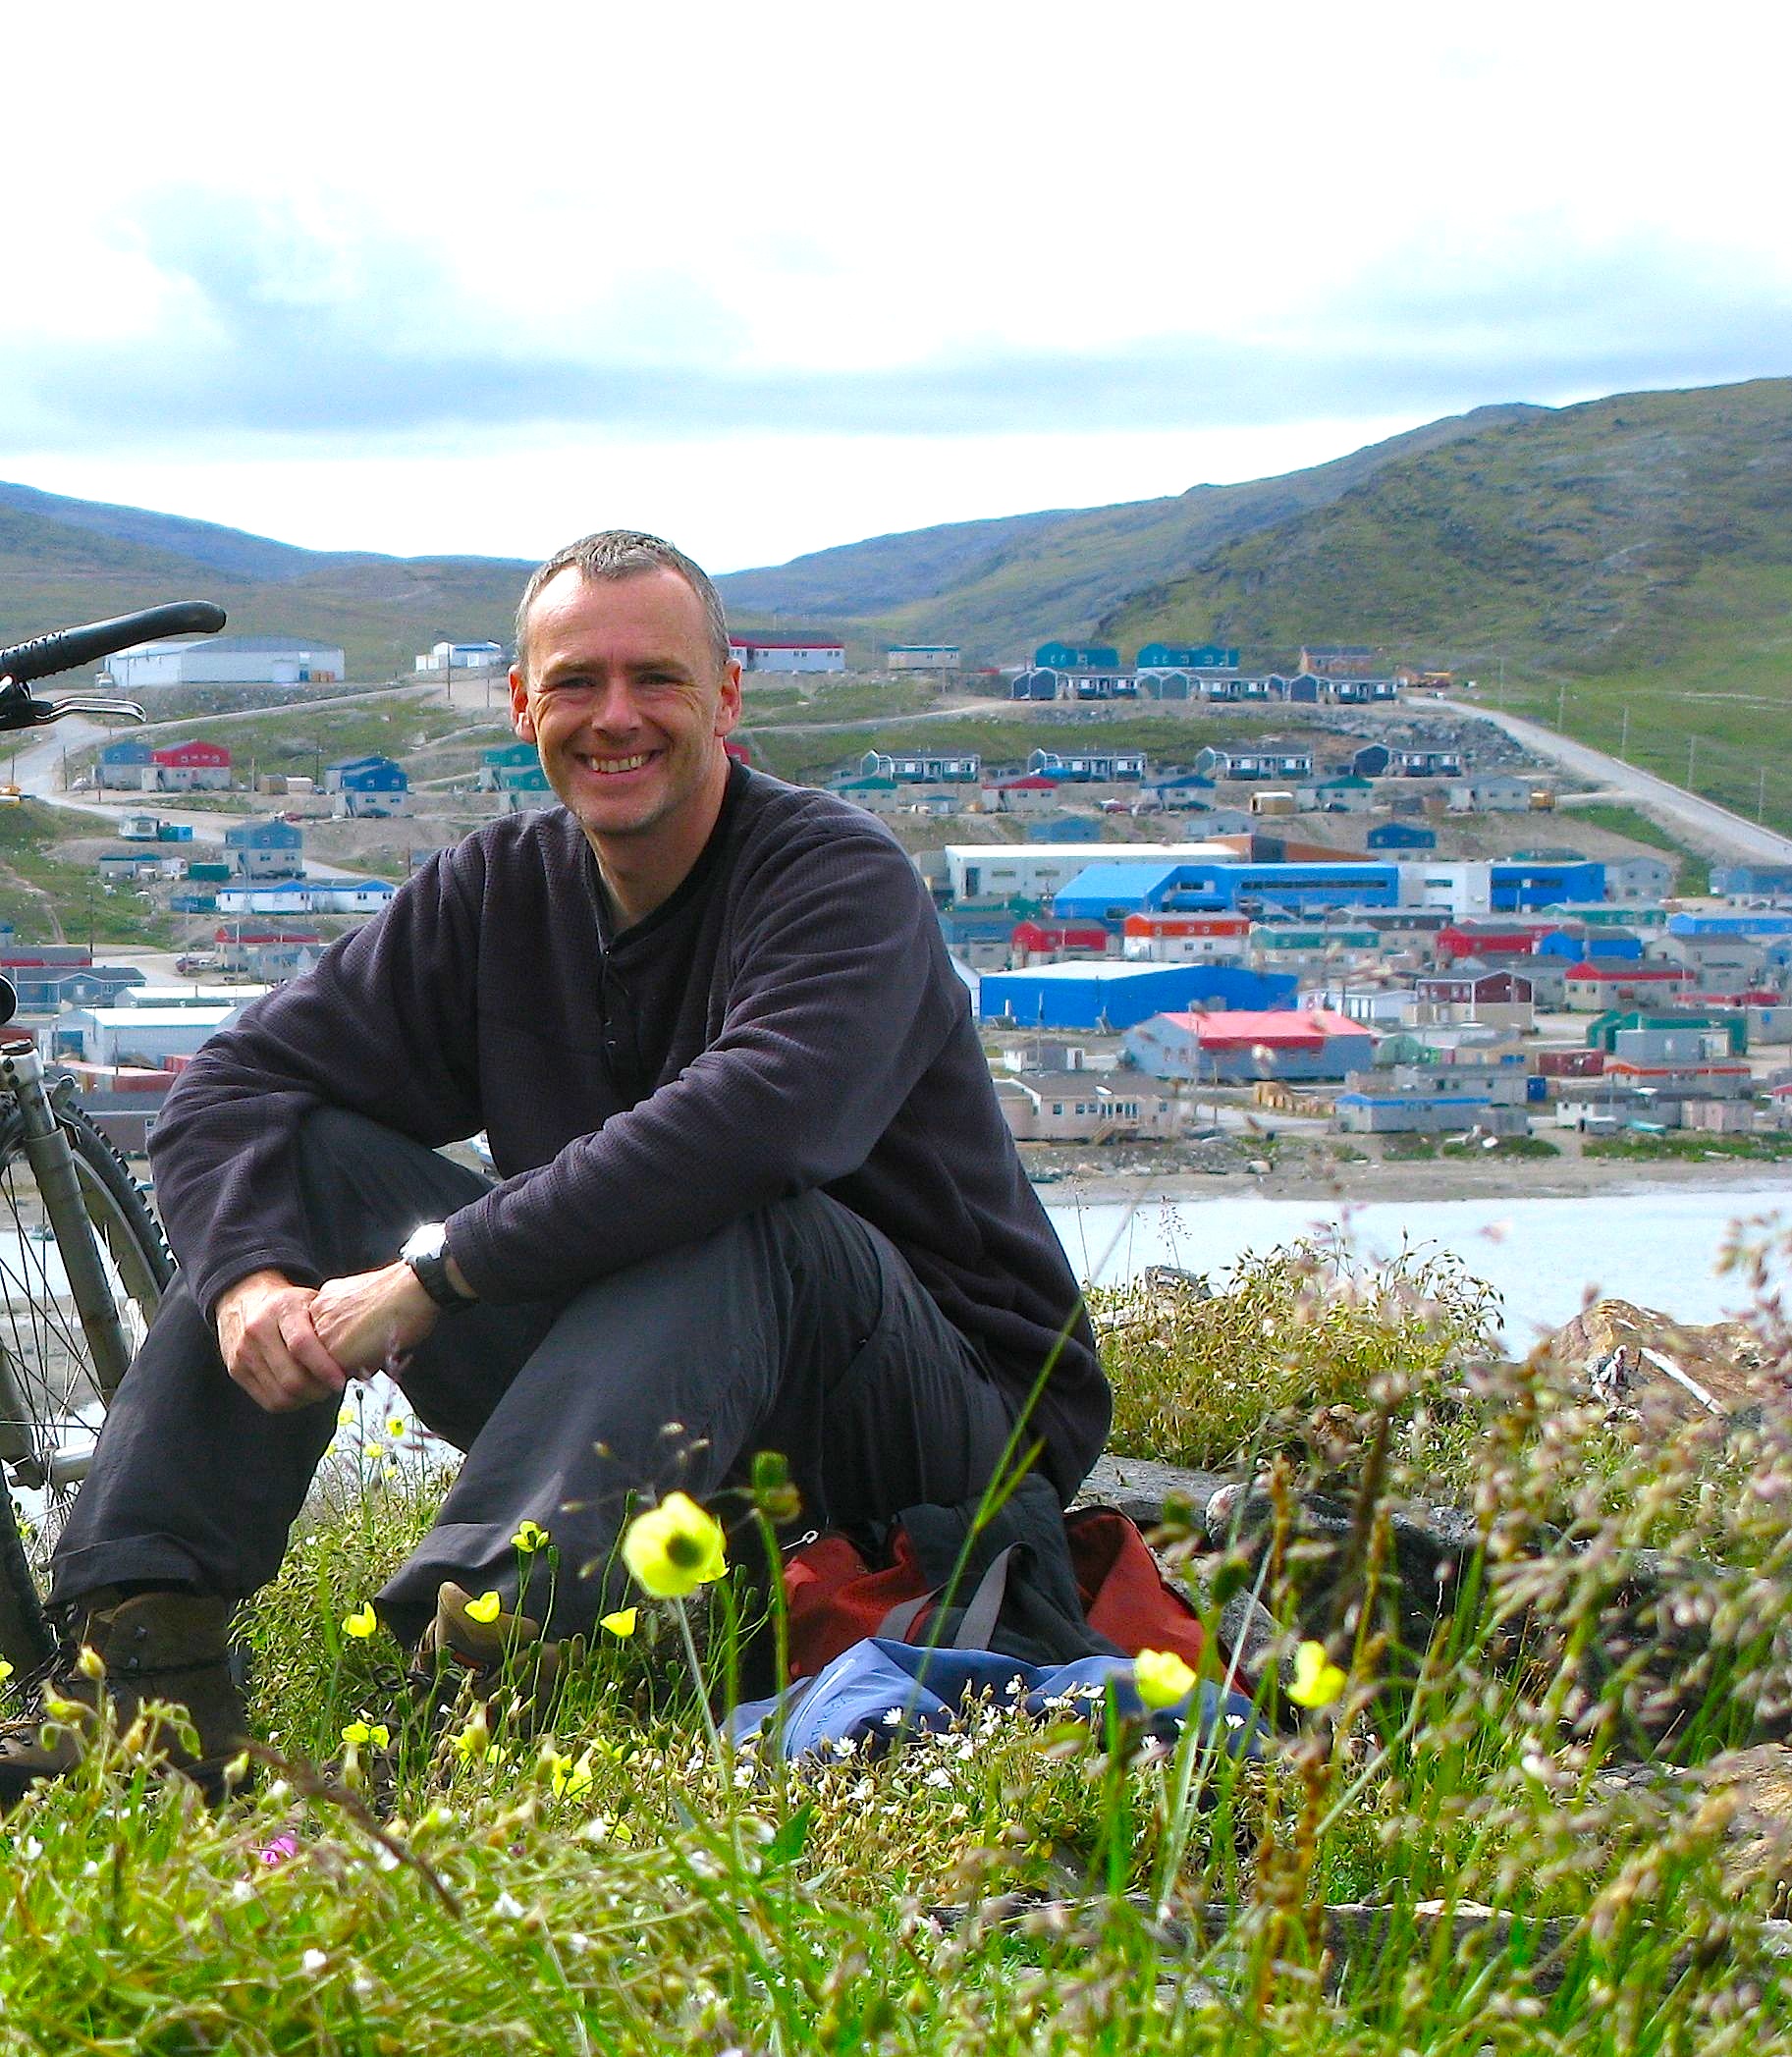 The Québec Solidaire candidate for the Sept. 4 Quebec election, Sylvain Couture, seen here in Salluit, knows Nunavik well, having practiced medicine there for several years. (PHOTO COURTESY OF S. COUTURE)